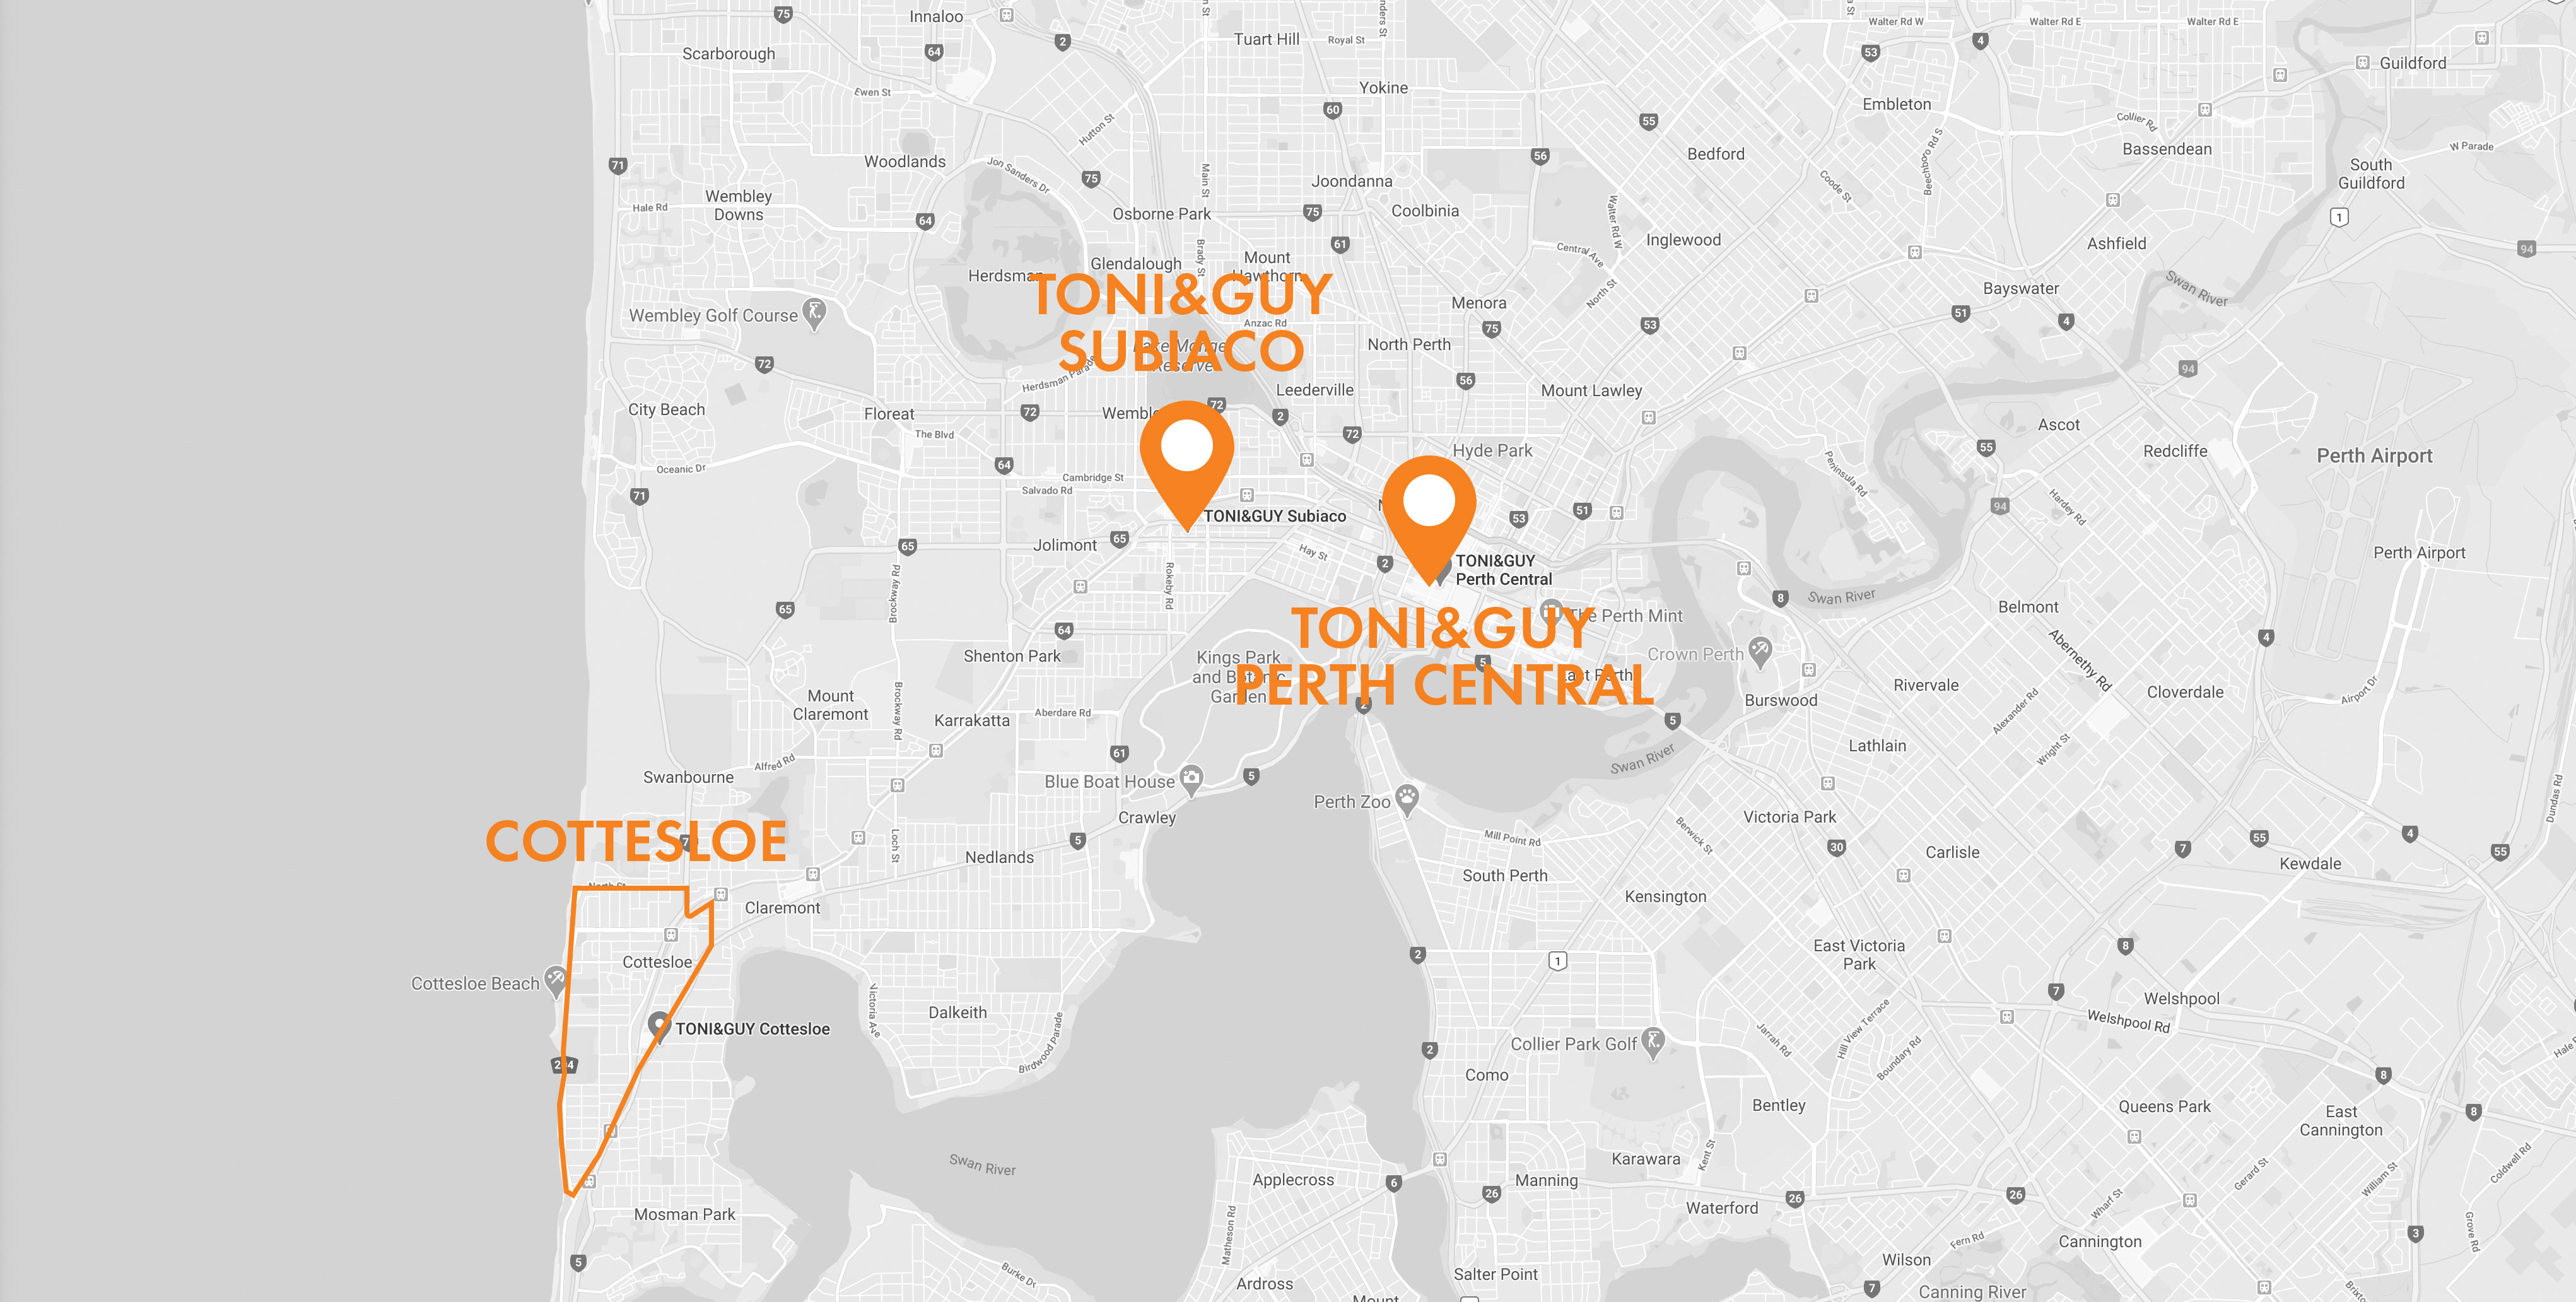 Cottesloe Hair Salon - Find the best hairdresser near you | TONI&GUY